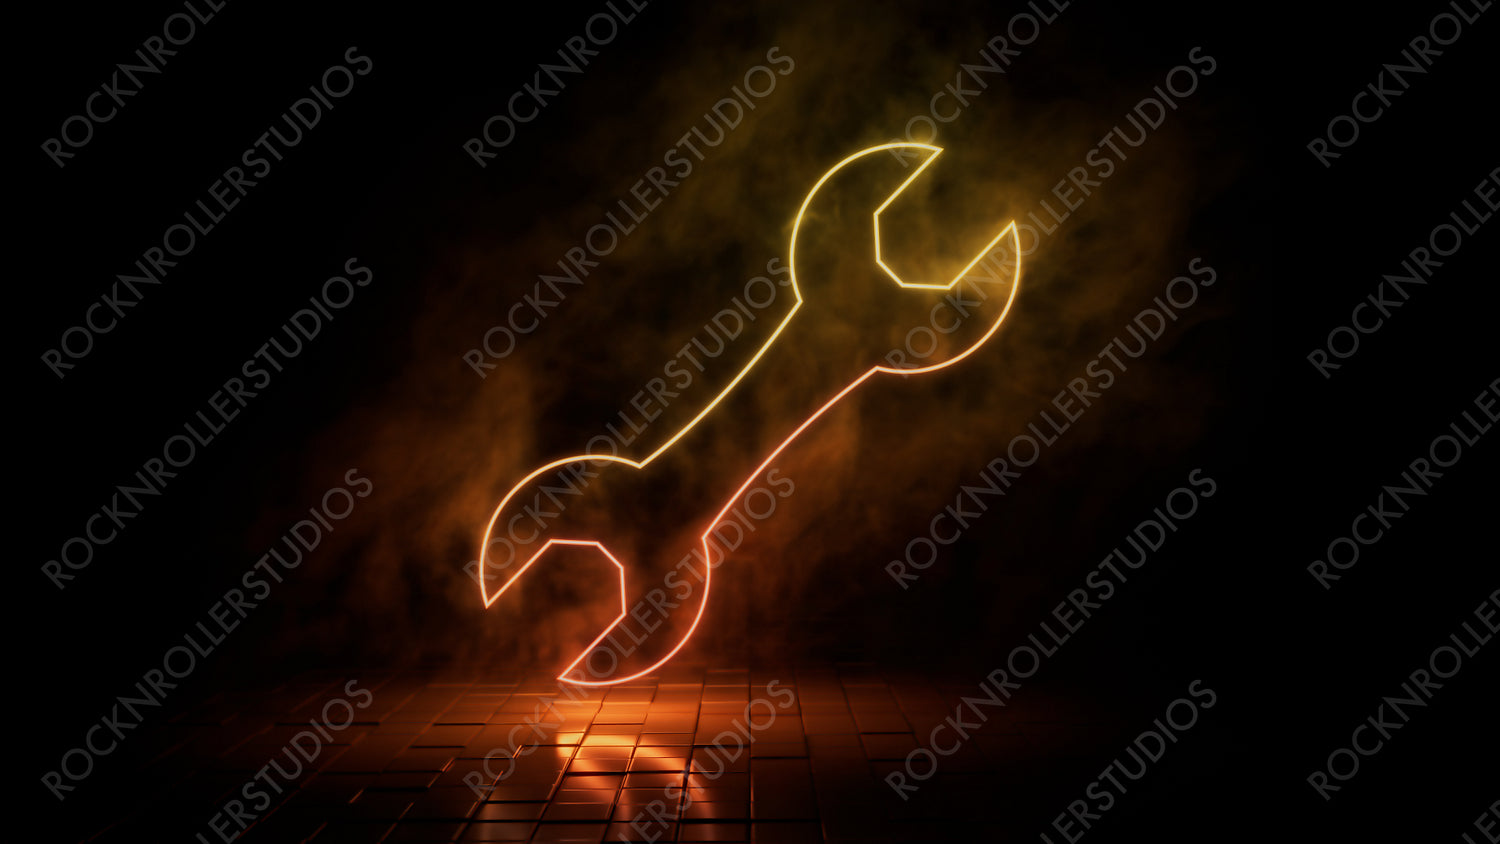 Orange and yellow neon light tool icon. Vibrant colored technology symbol, isolated on a black background. 3D Render